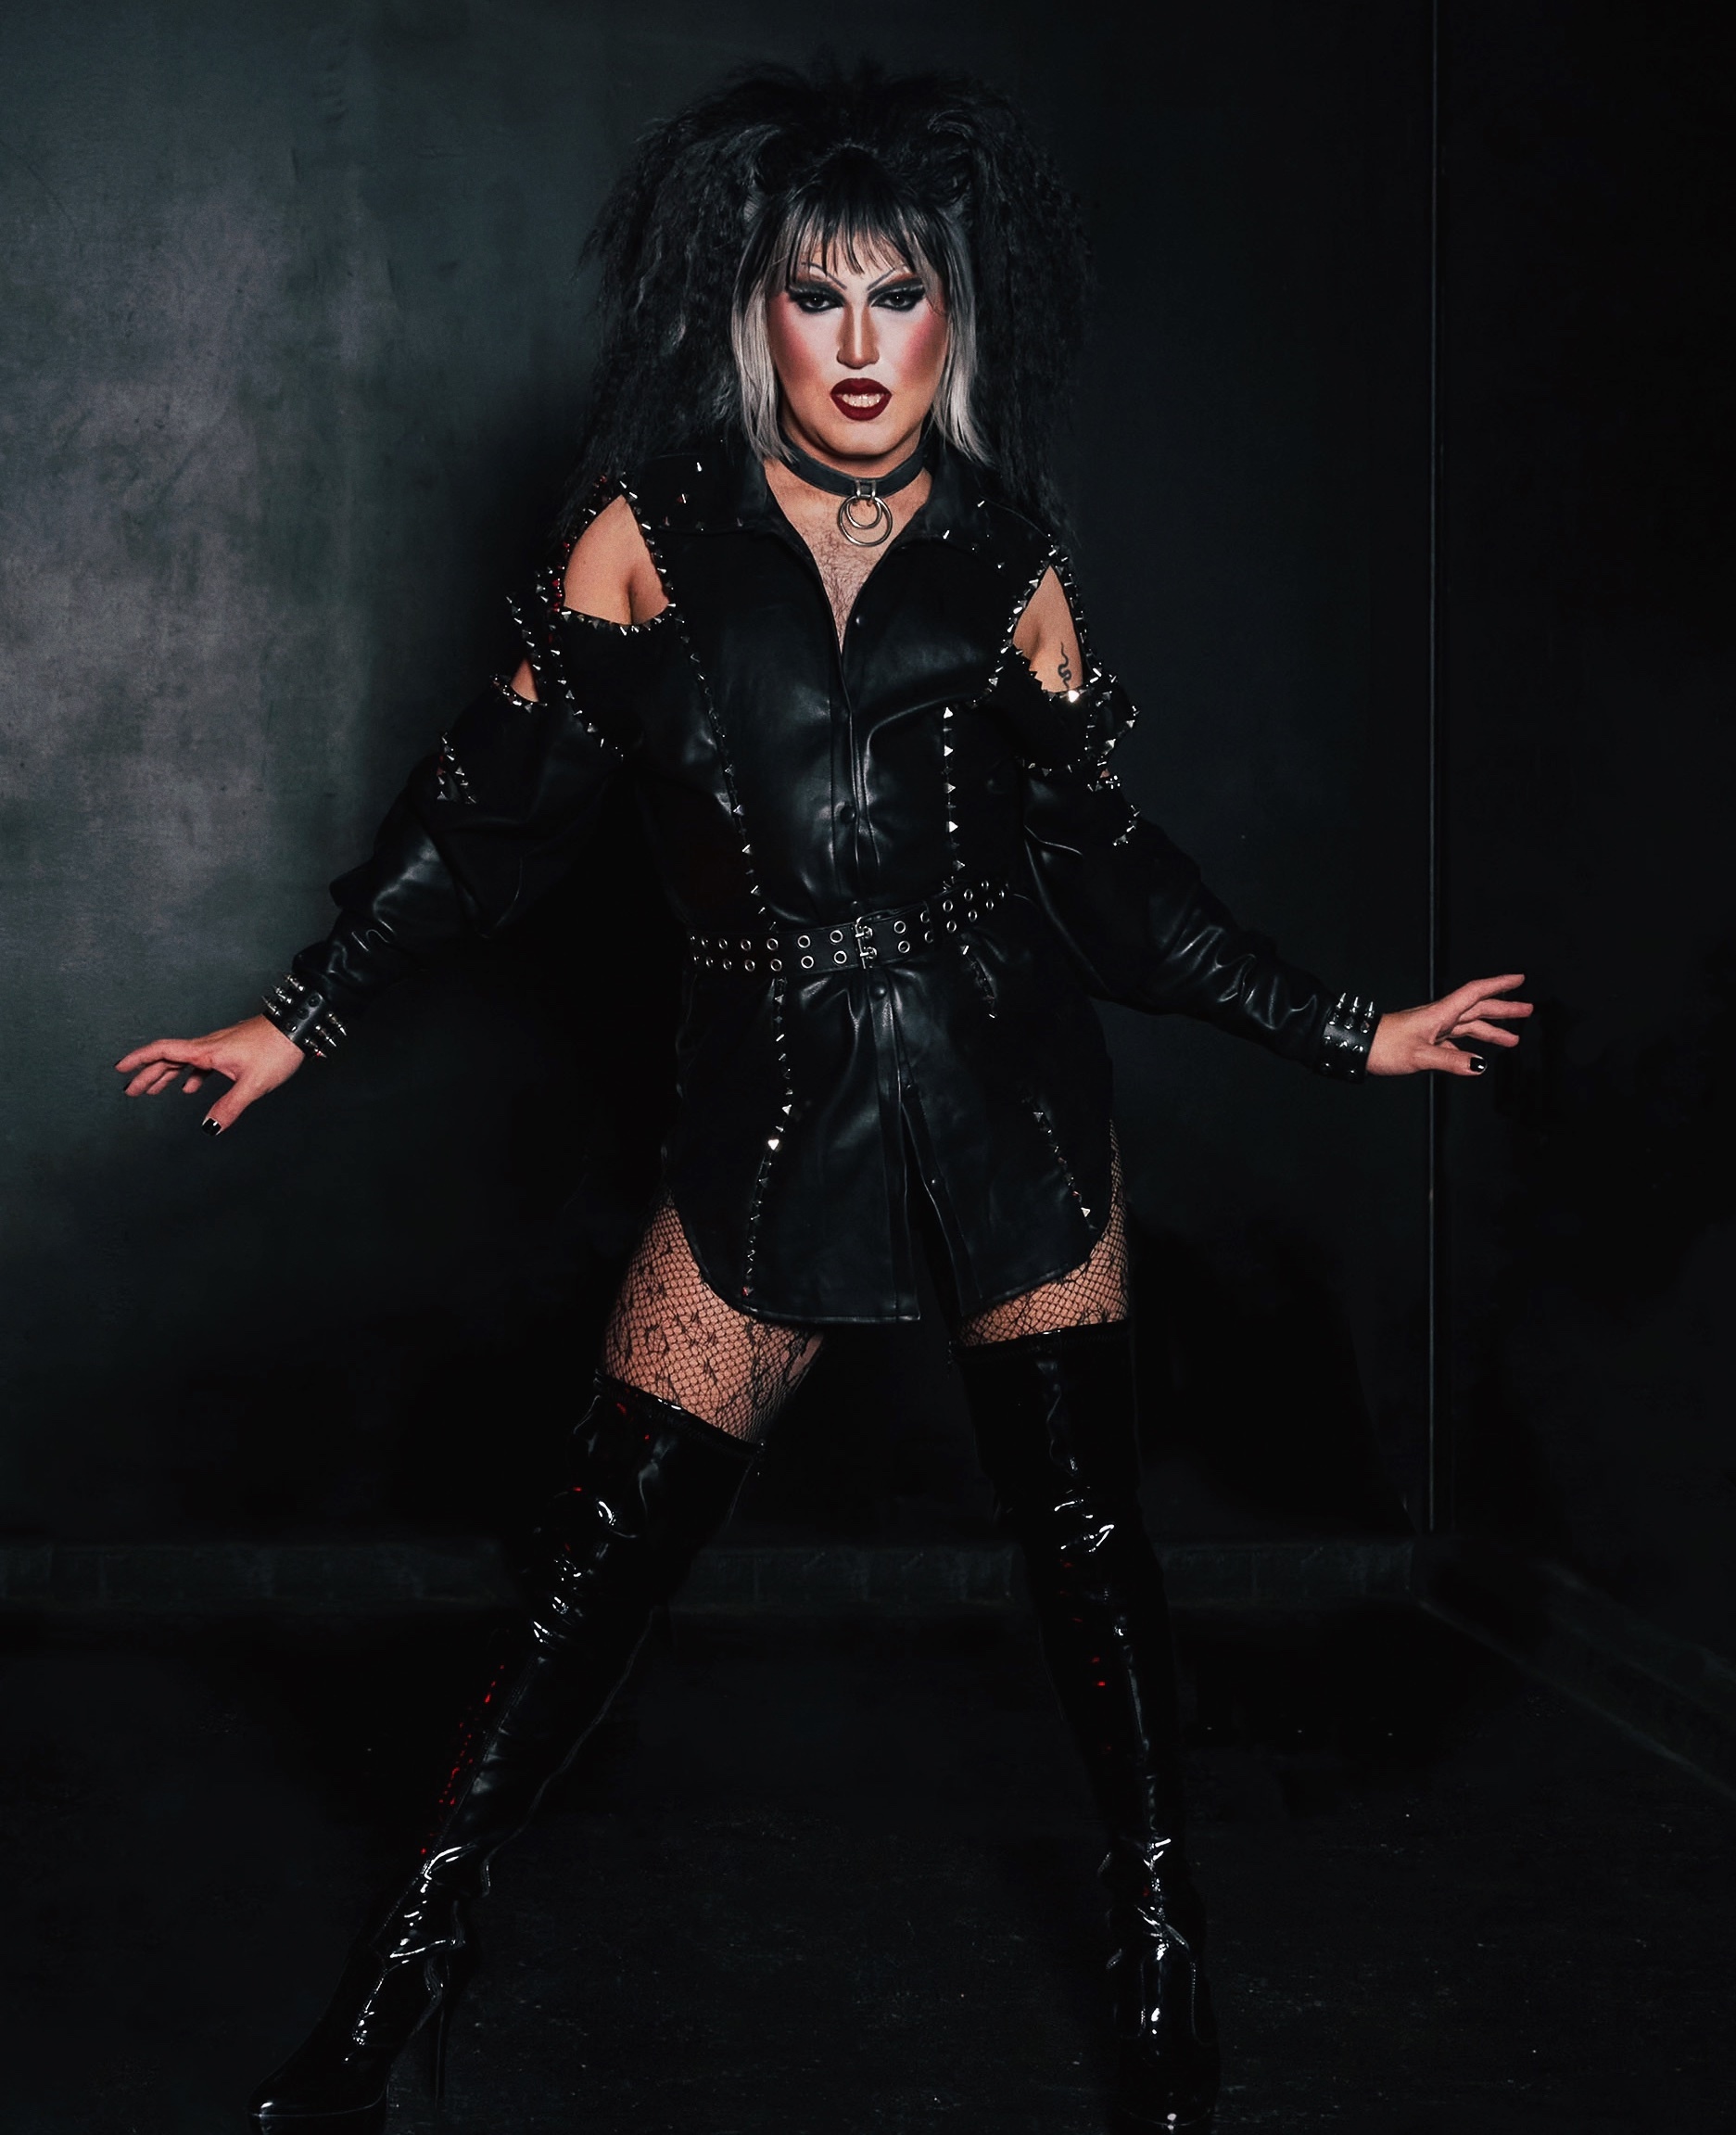 A drag performer in a black leather outfit.